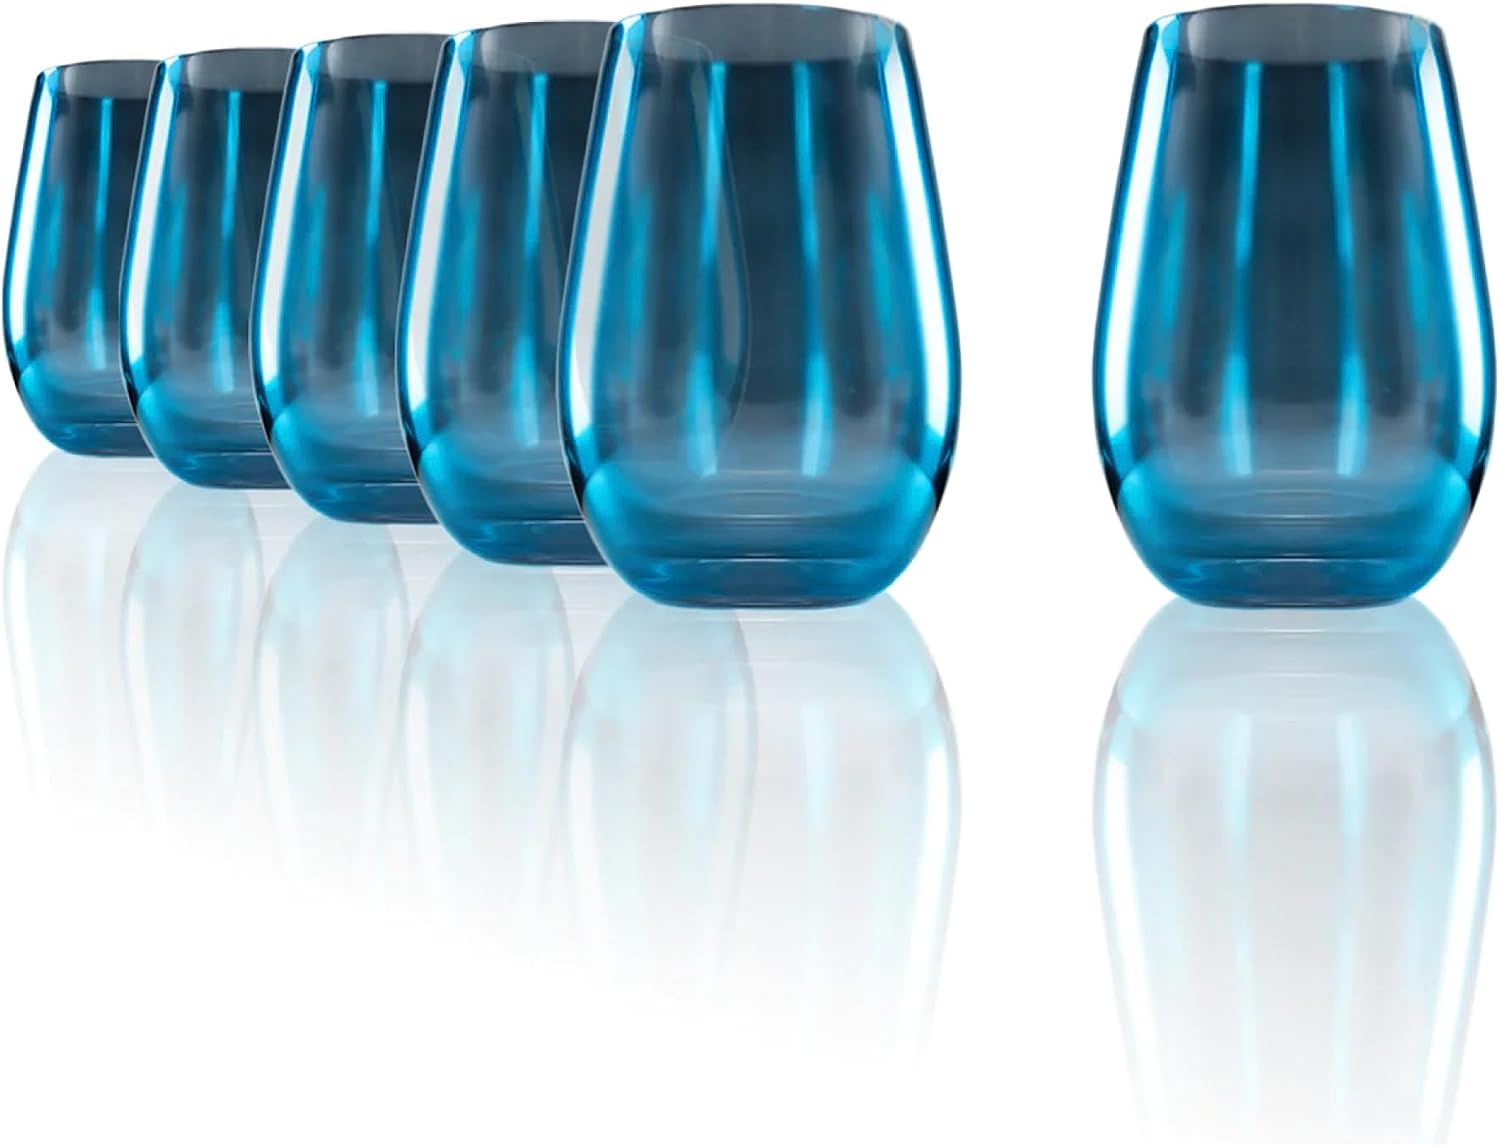 Stölzle Lausitz Long Drink Cups Mirror Blue / Set of 6 Drinking Glasses / Cocktail Glasses / High-Quality Long Drink Glasses Set in Mirrored Look / Gin Glasses / Highball Glasses